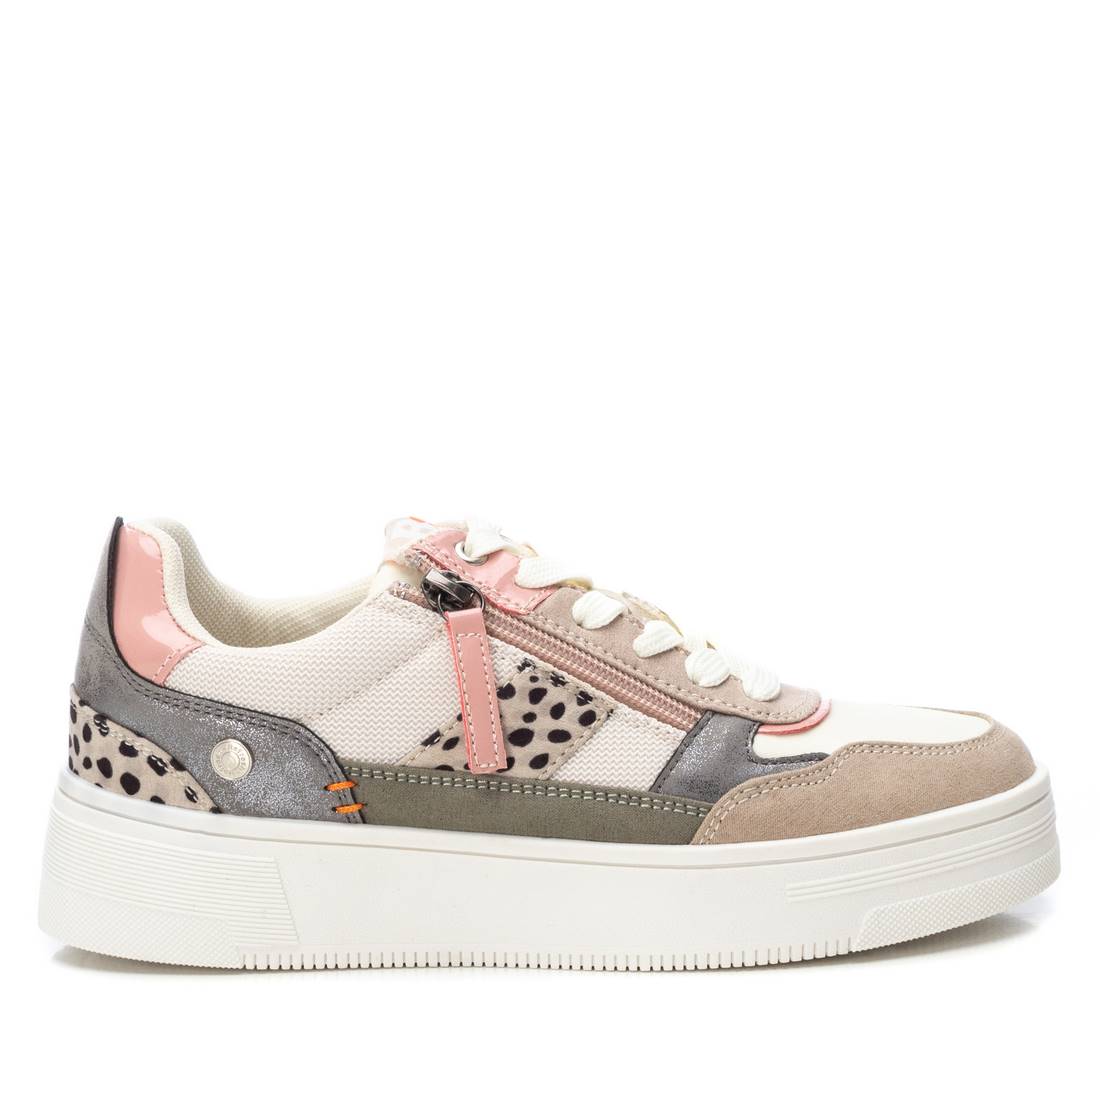 Refresh - Zip Trainer with animal print in beige and pink 171557